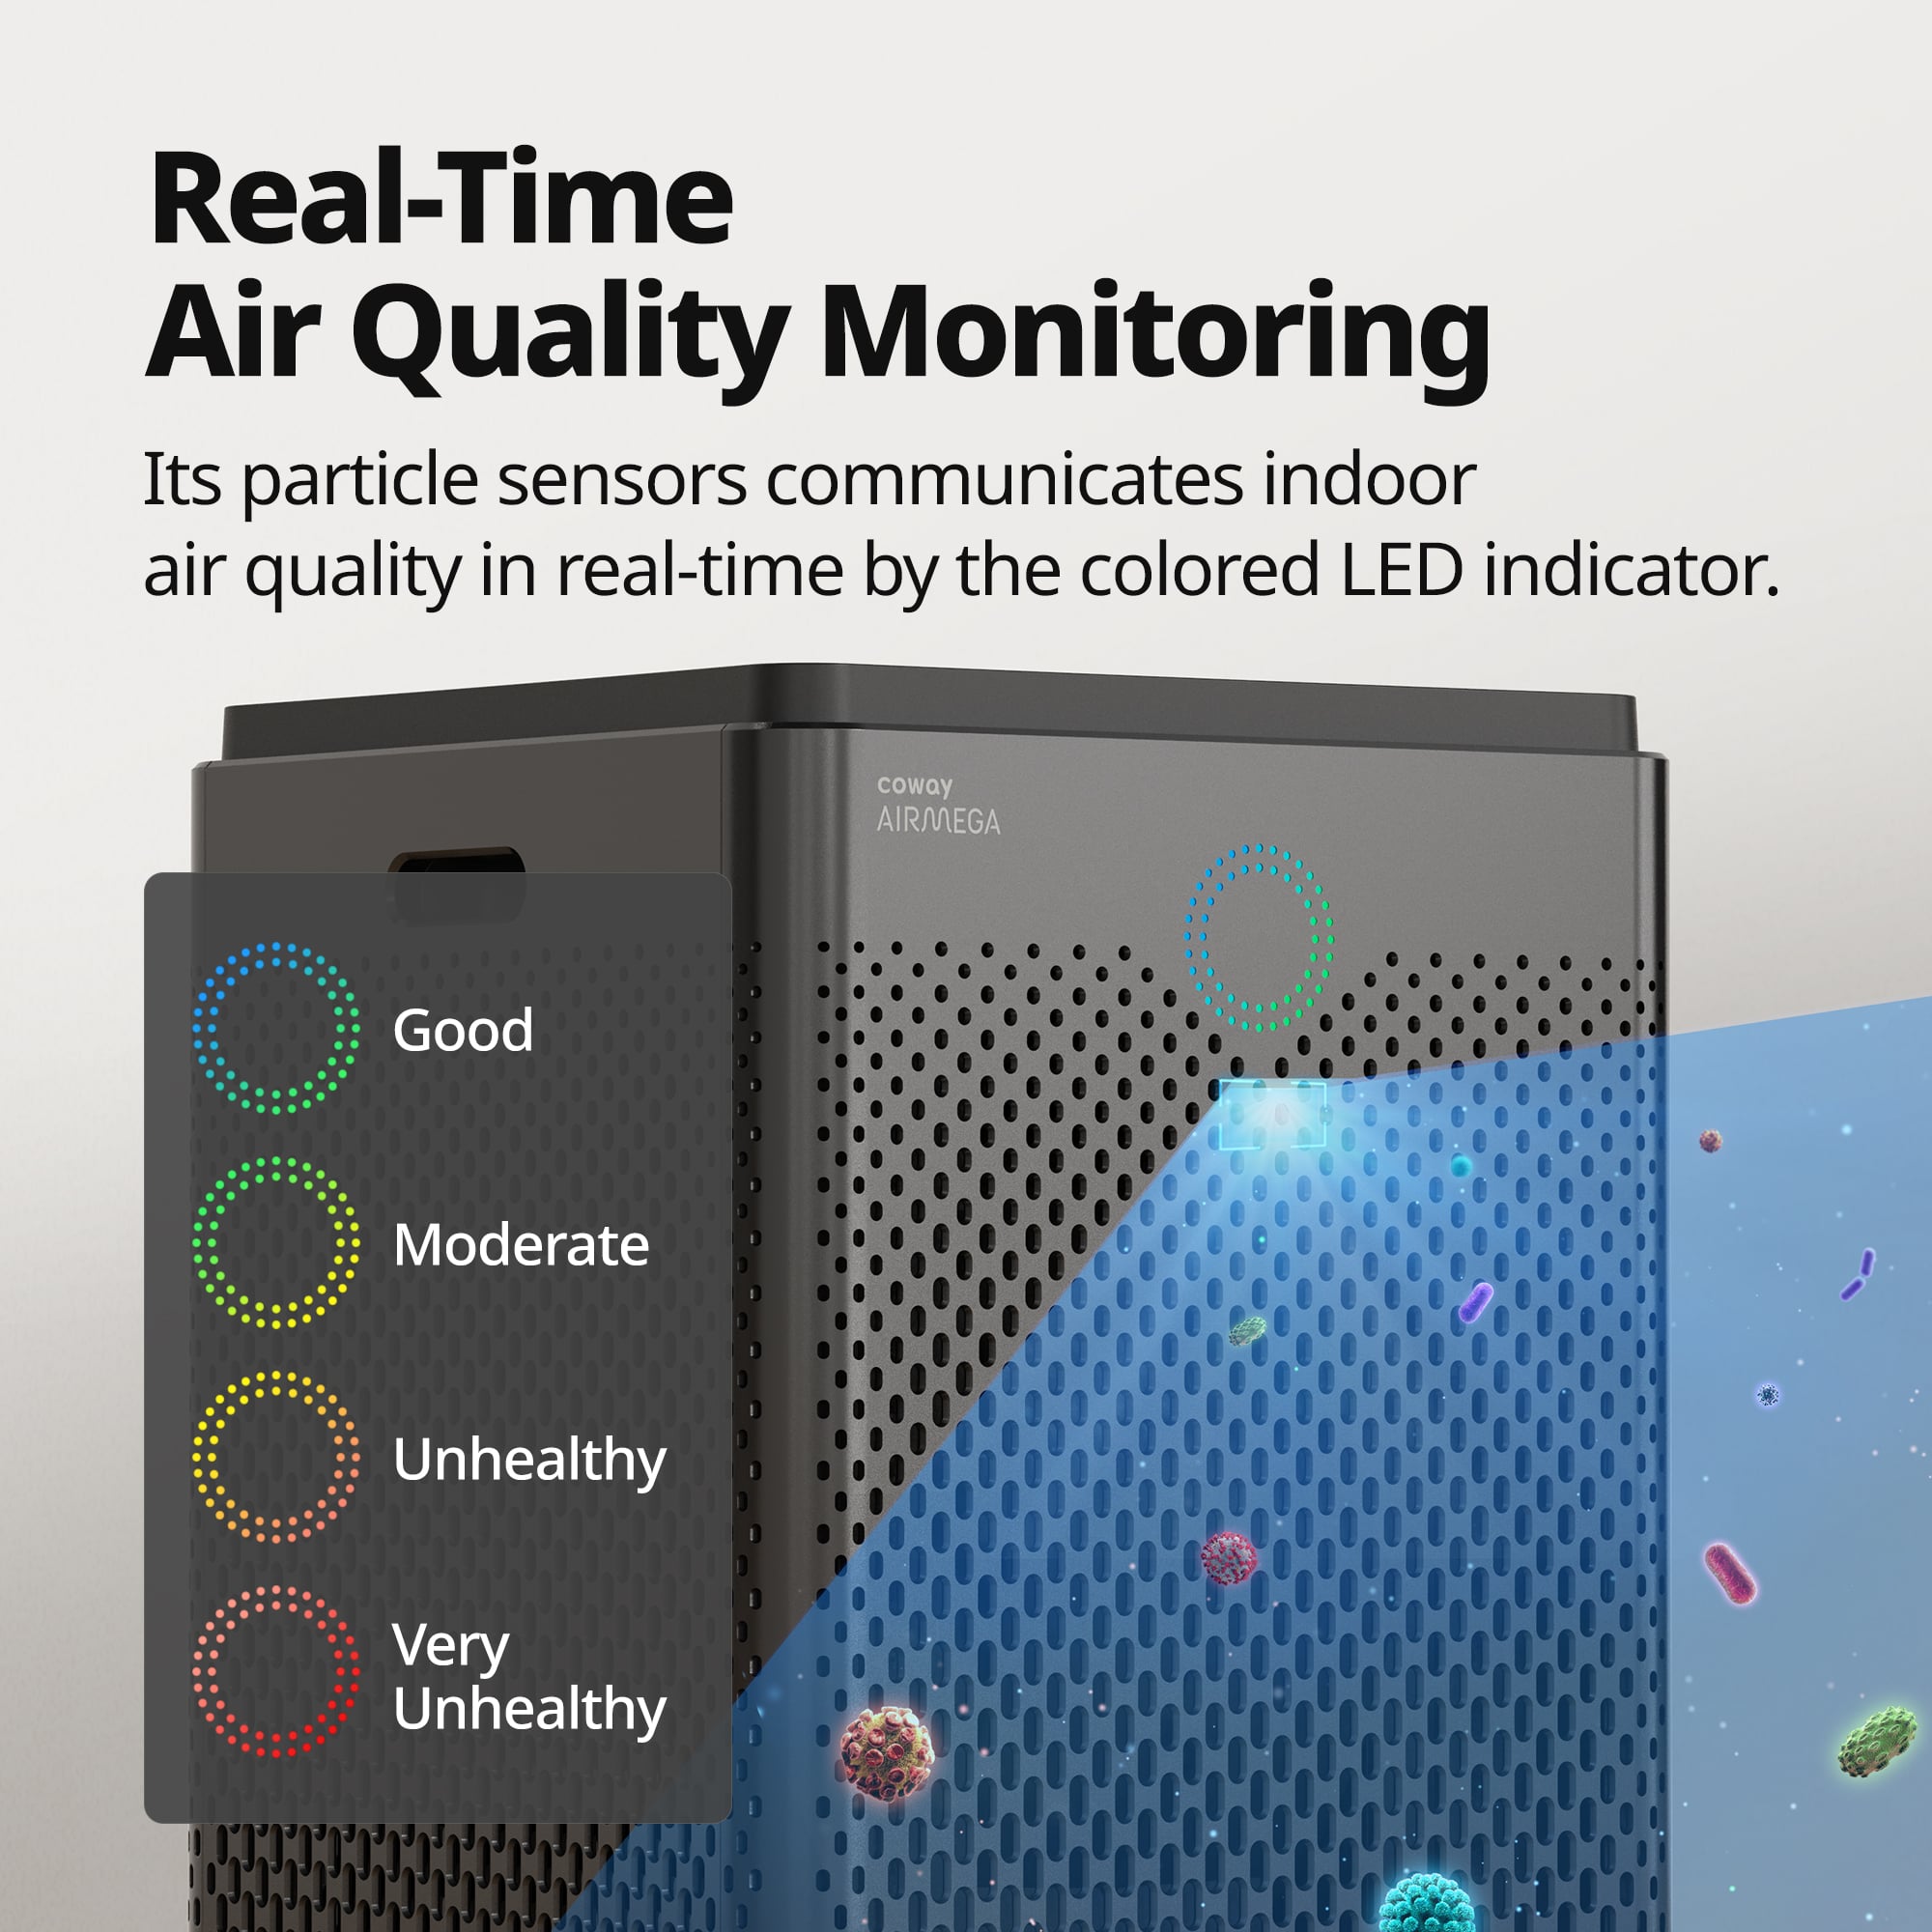 Real-Time Air Quality Monitoring